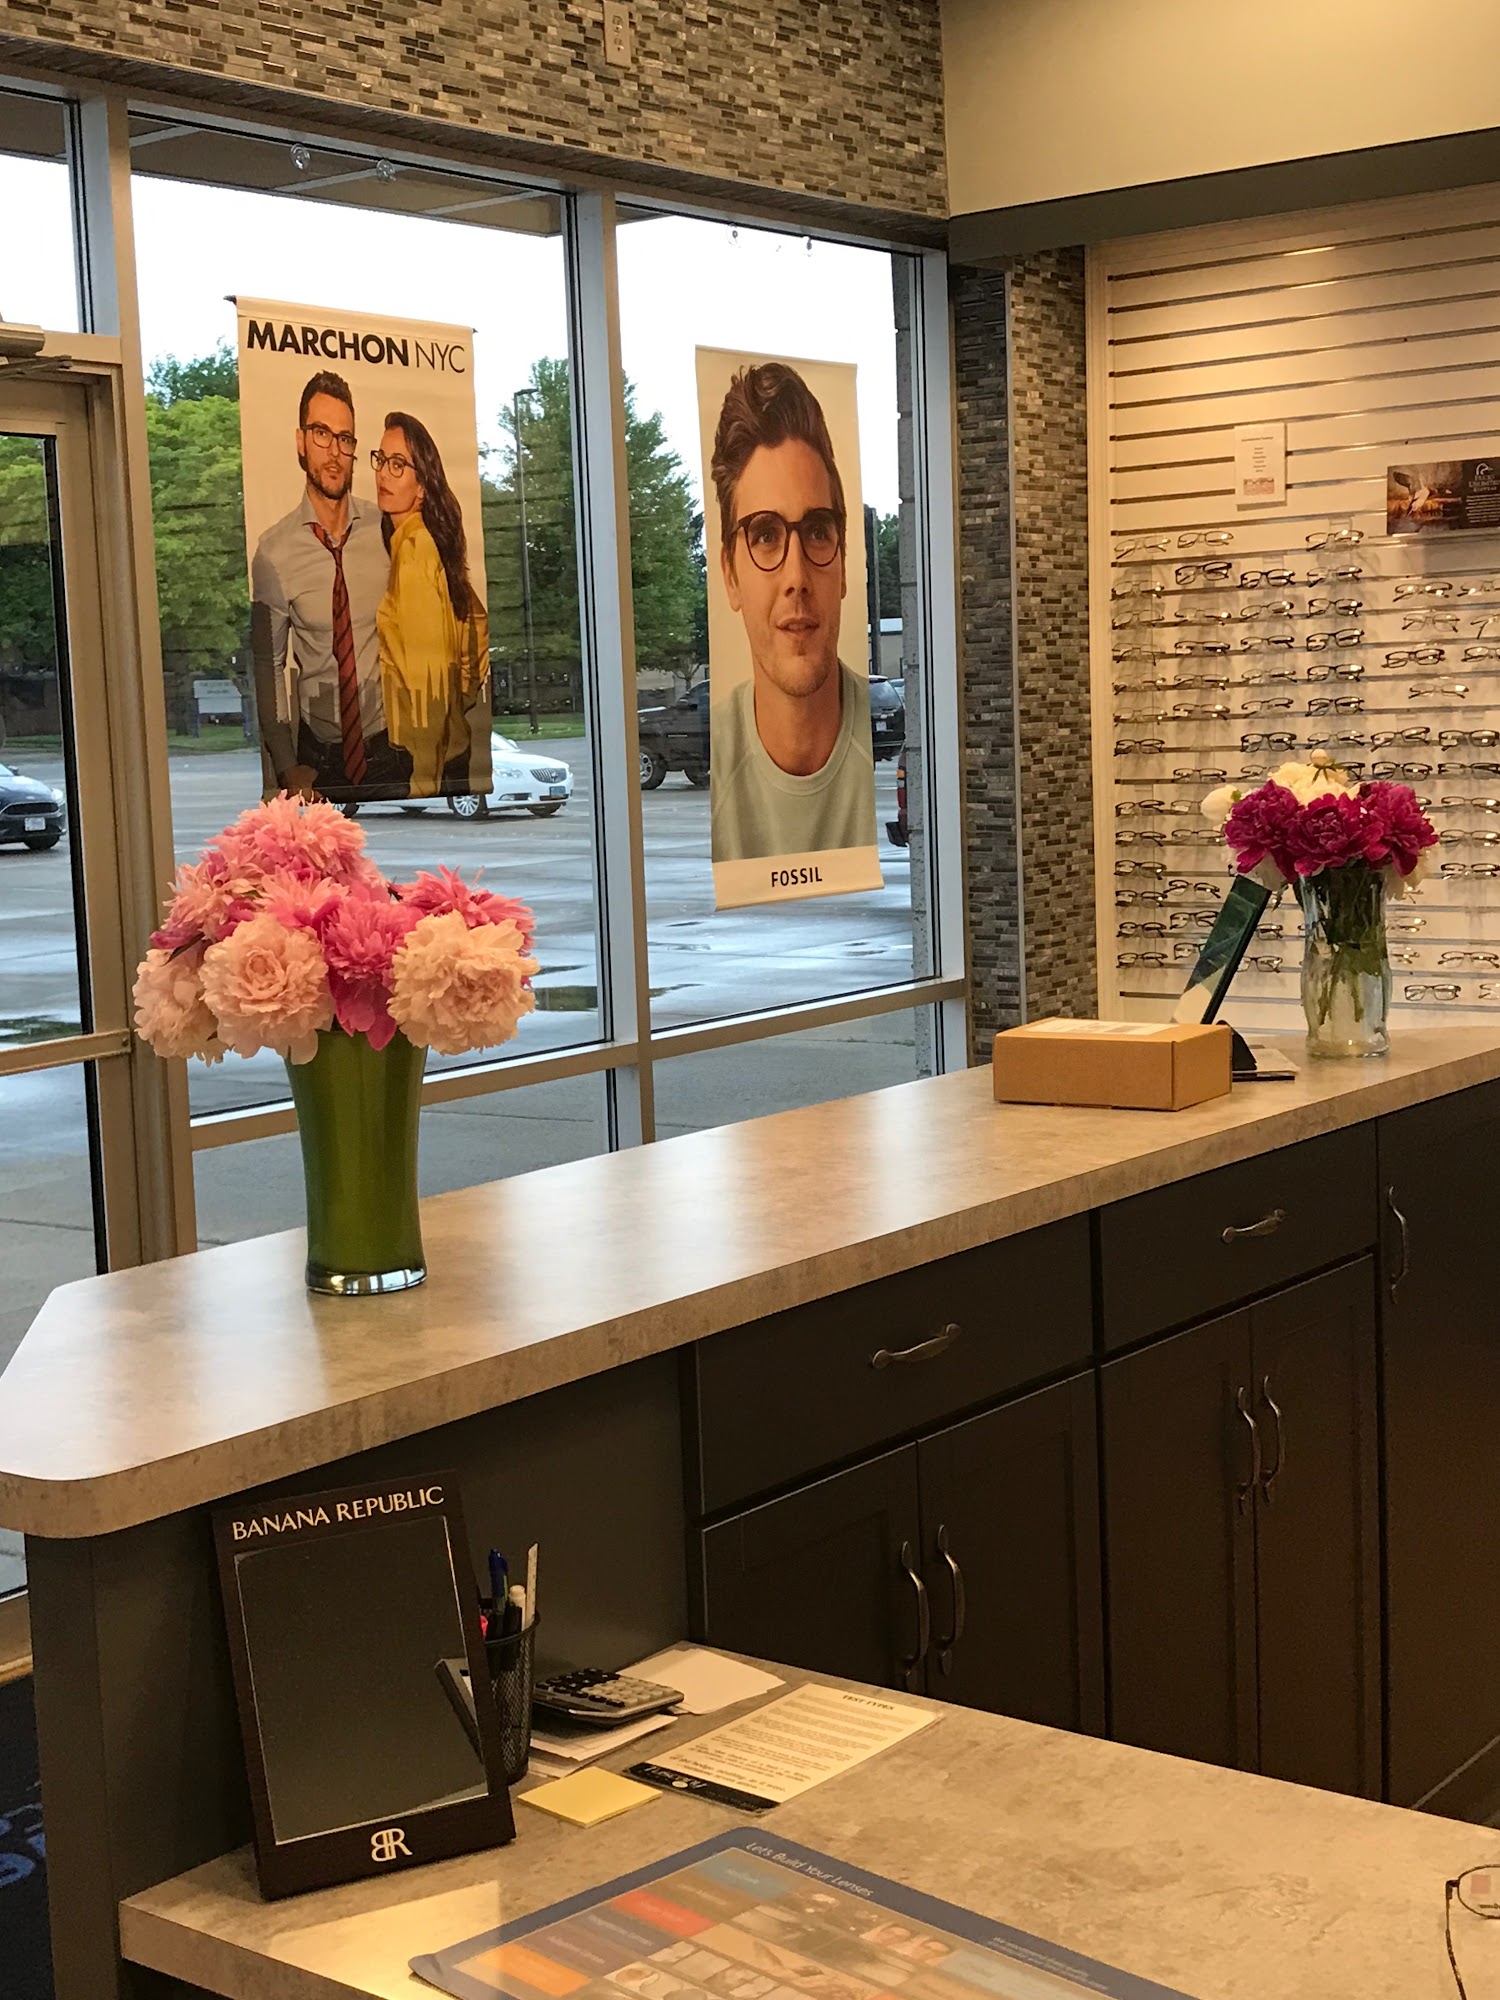 Midwest Vision Centers now part of Shopko Optical - Marshall Eye Doctor